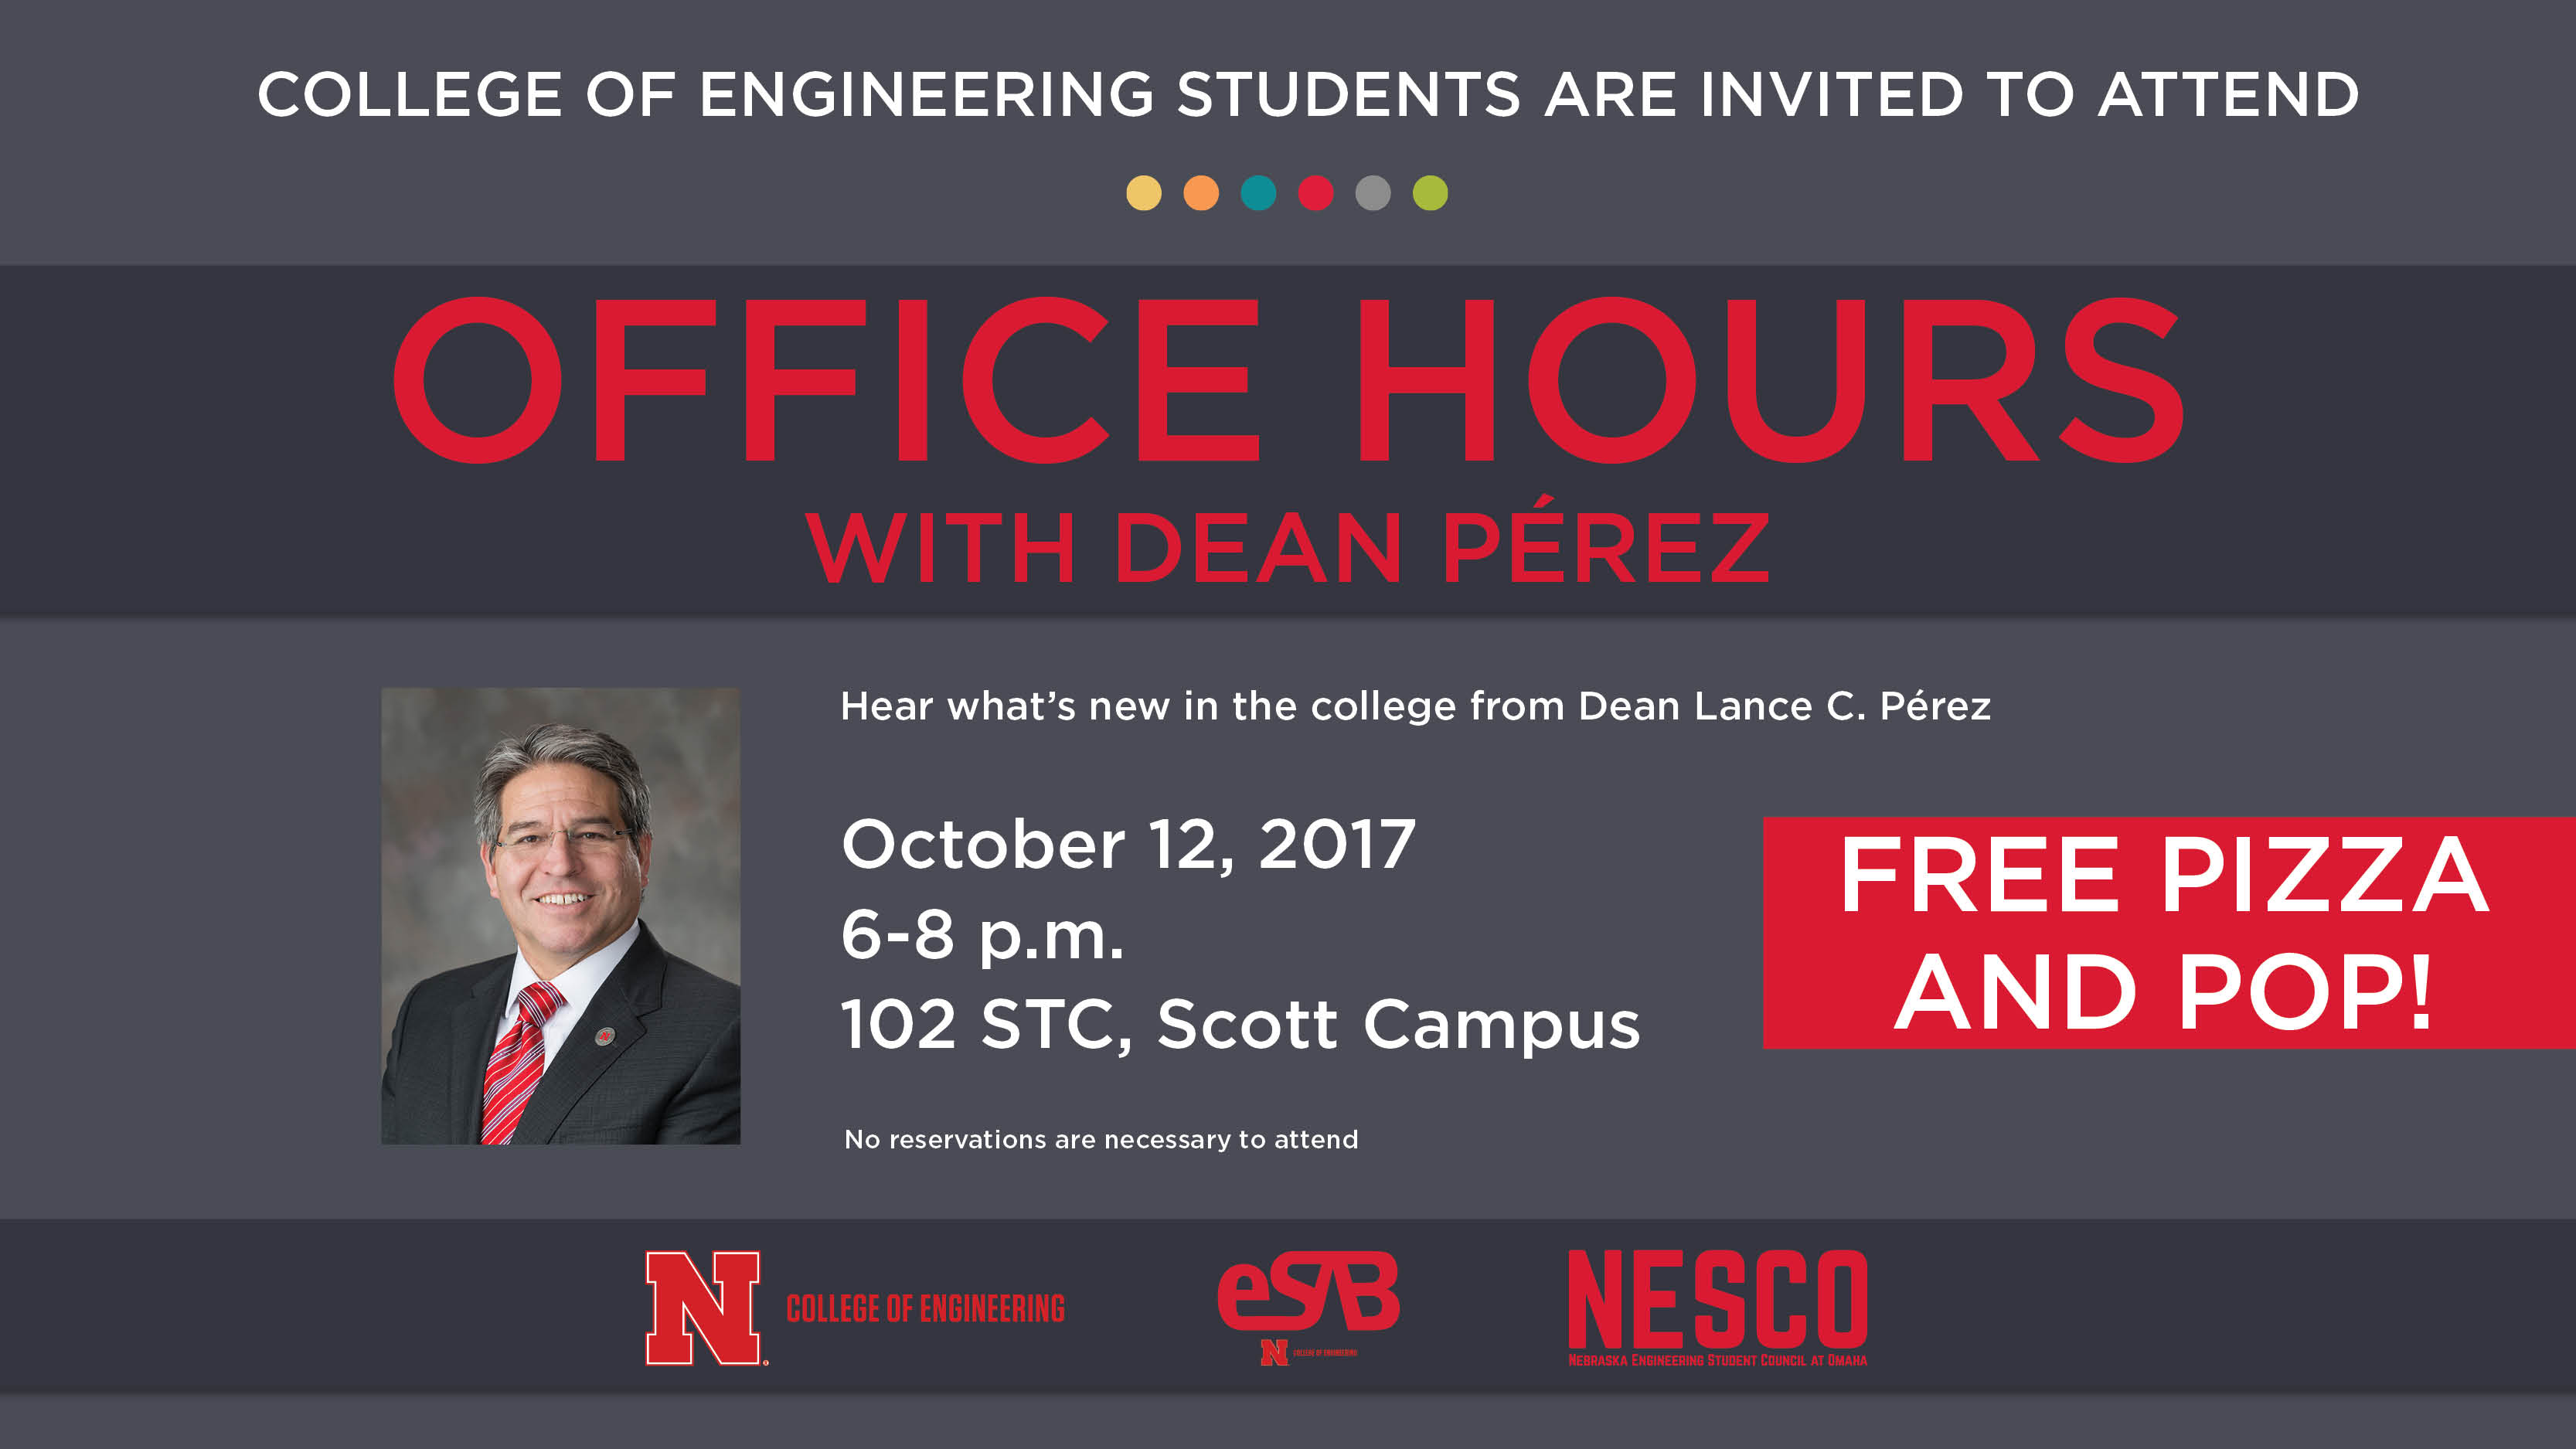 Office Hours with Dean Pérez is Thursday 6-8 p.m. in STC 102.